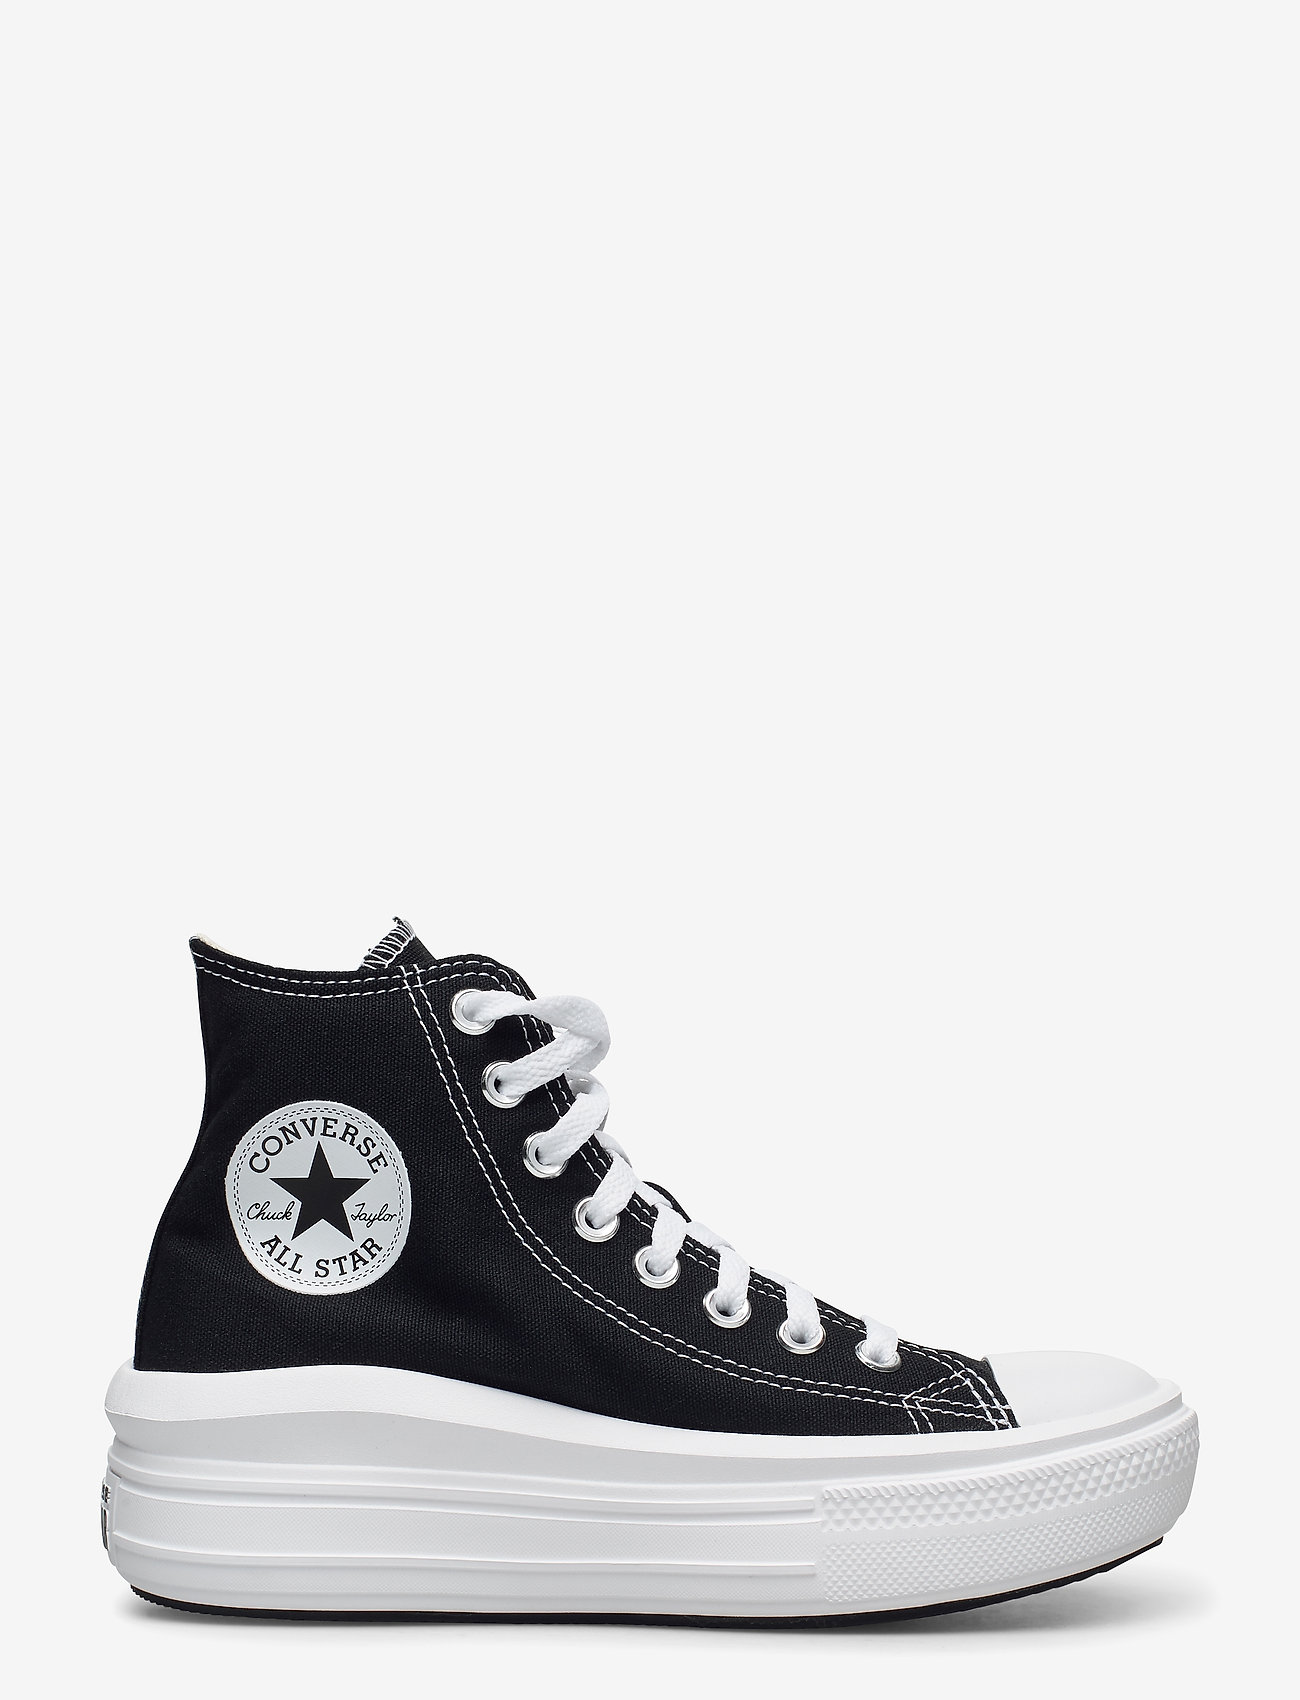 Converse - Chuck Taylor All Star Move - high top sneakers - black - 1